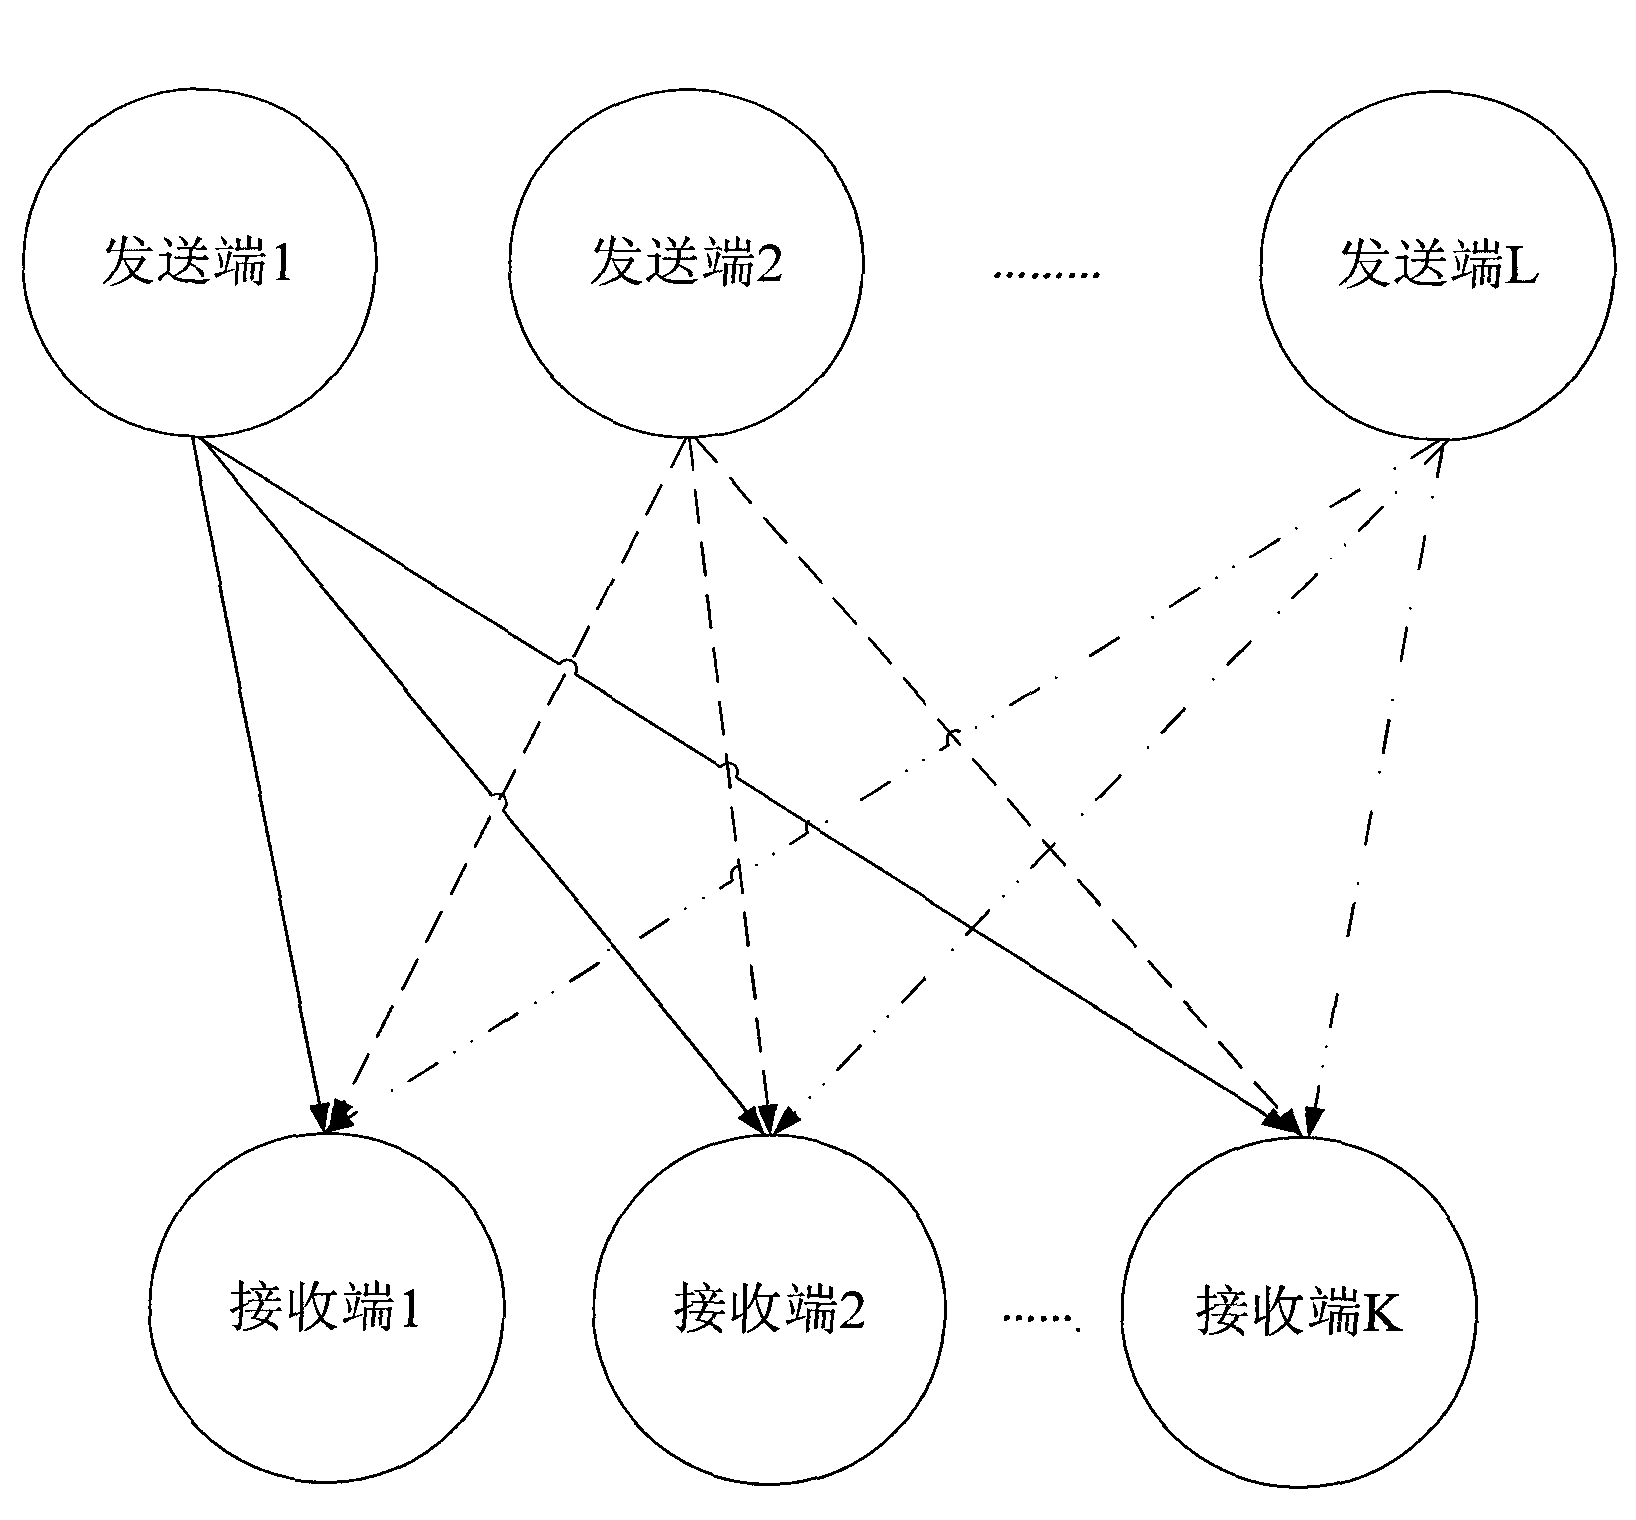 Interruption relaxation alignment method based on multi-point multi-user coordination downlink